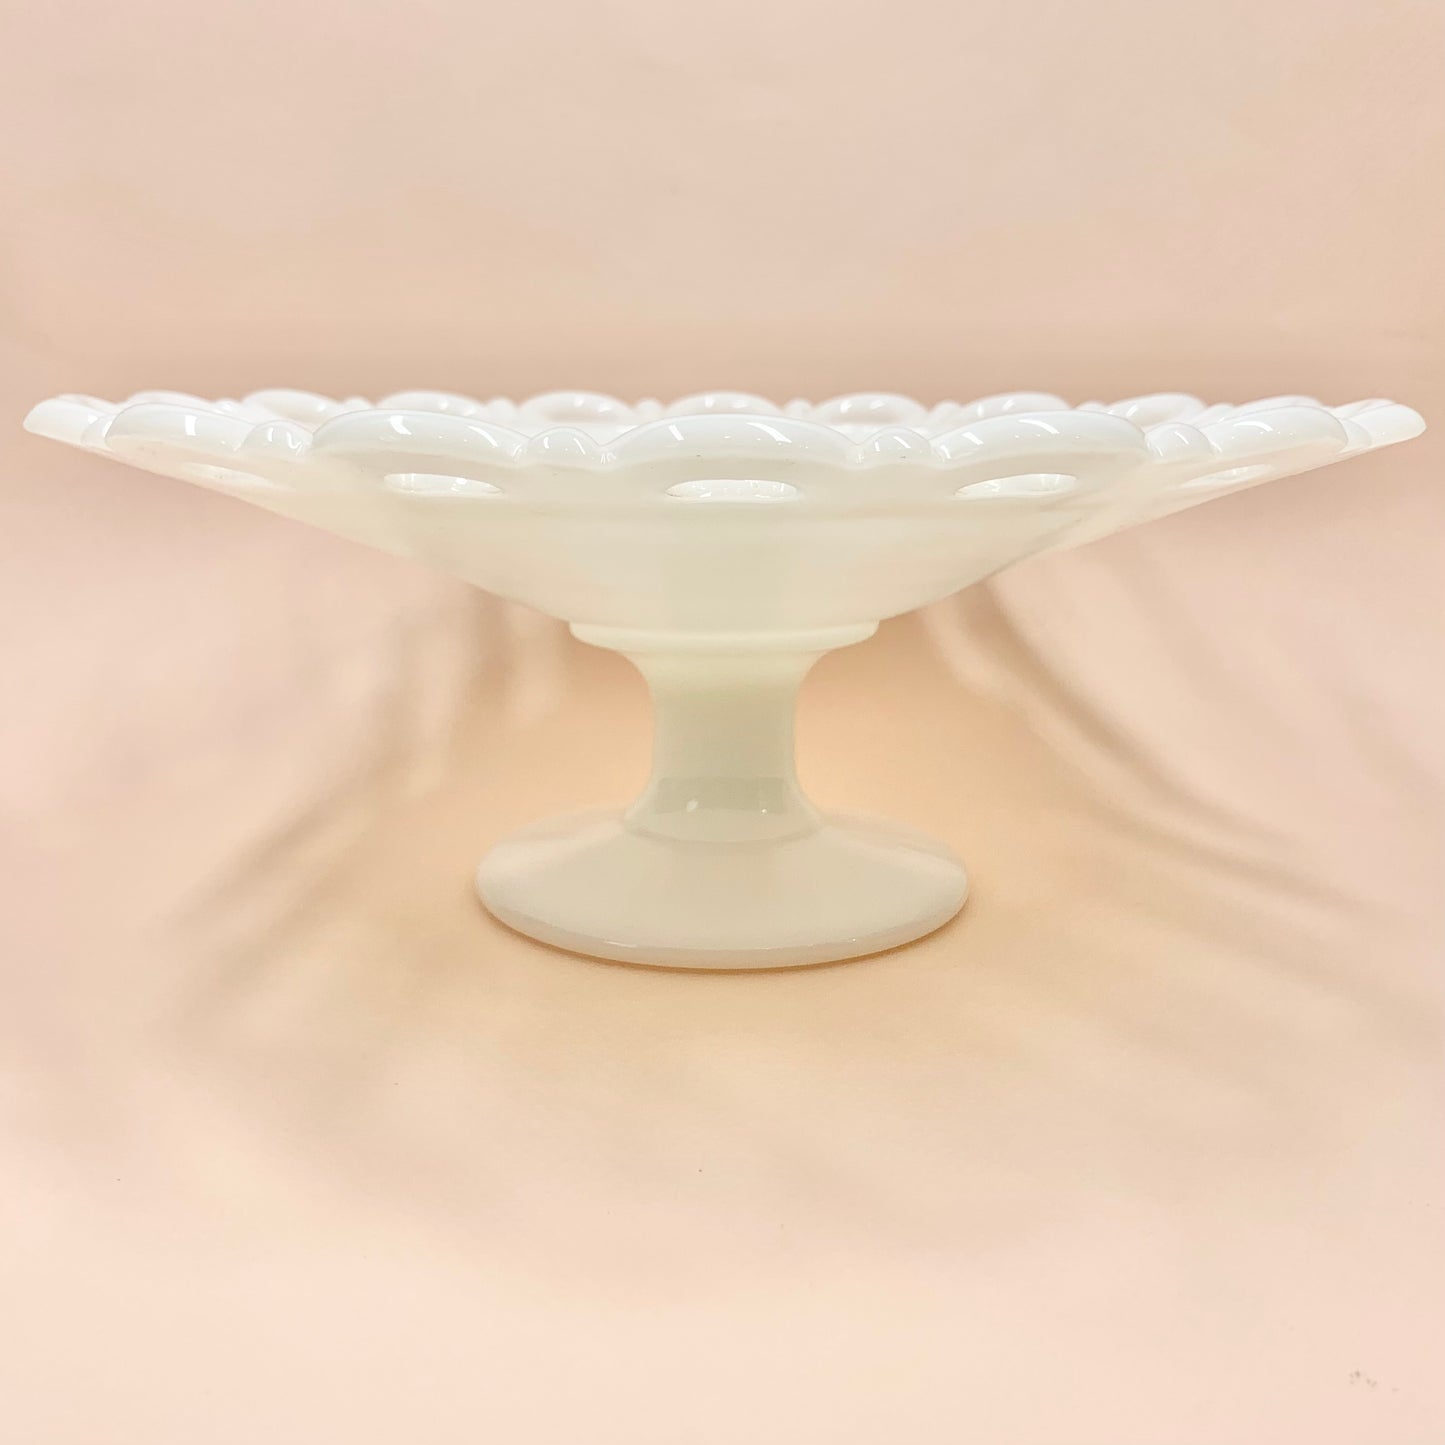 Antique milk glass footed comport